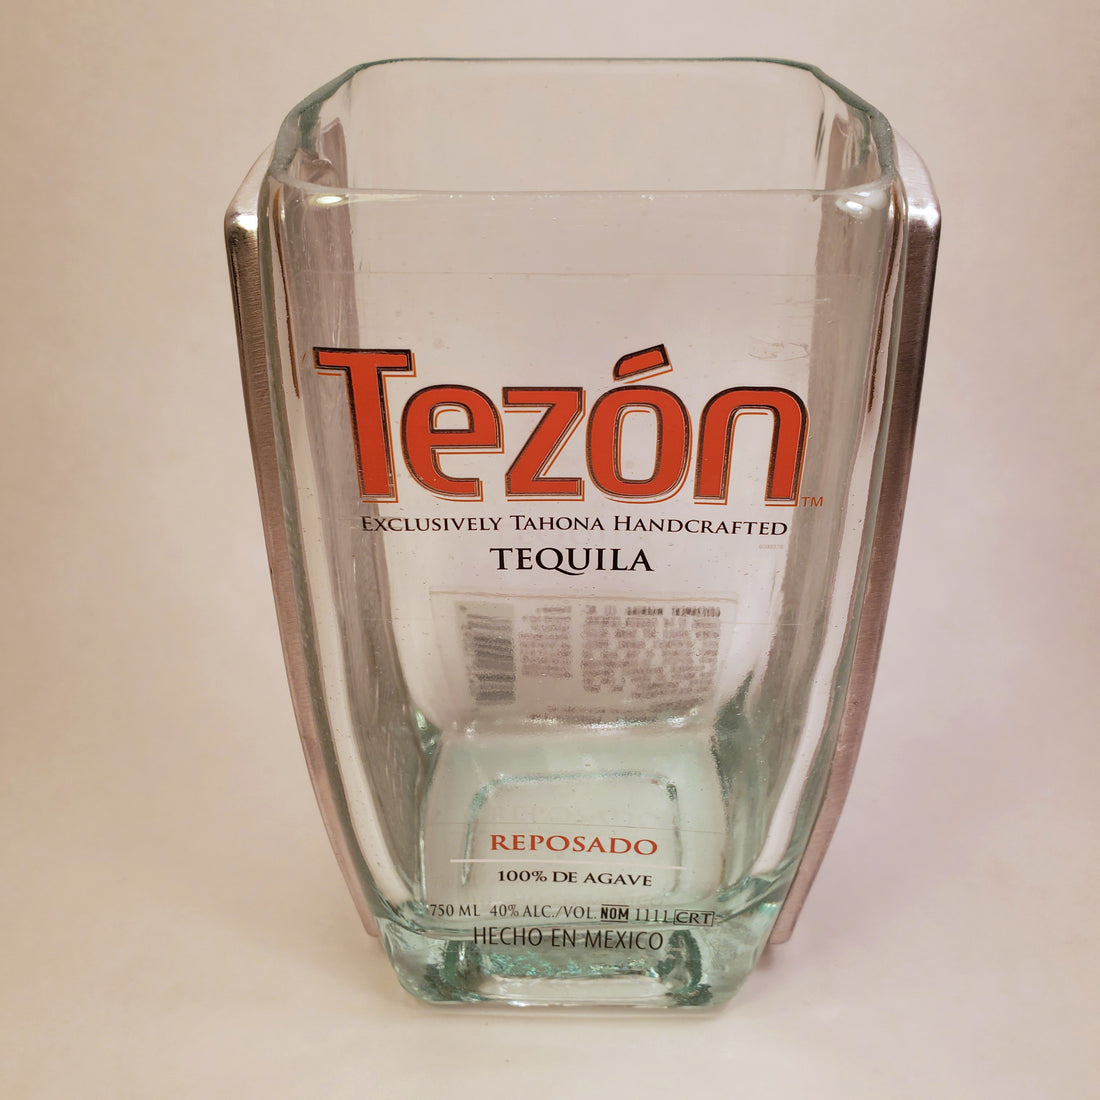 Tezon Tequila 750ml Hand Cut Upcycled Liquor Bottle Candle - Choose Your Scent